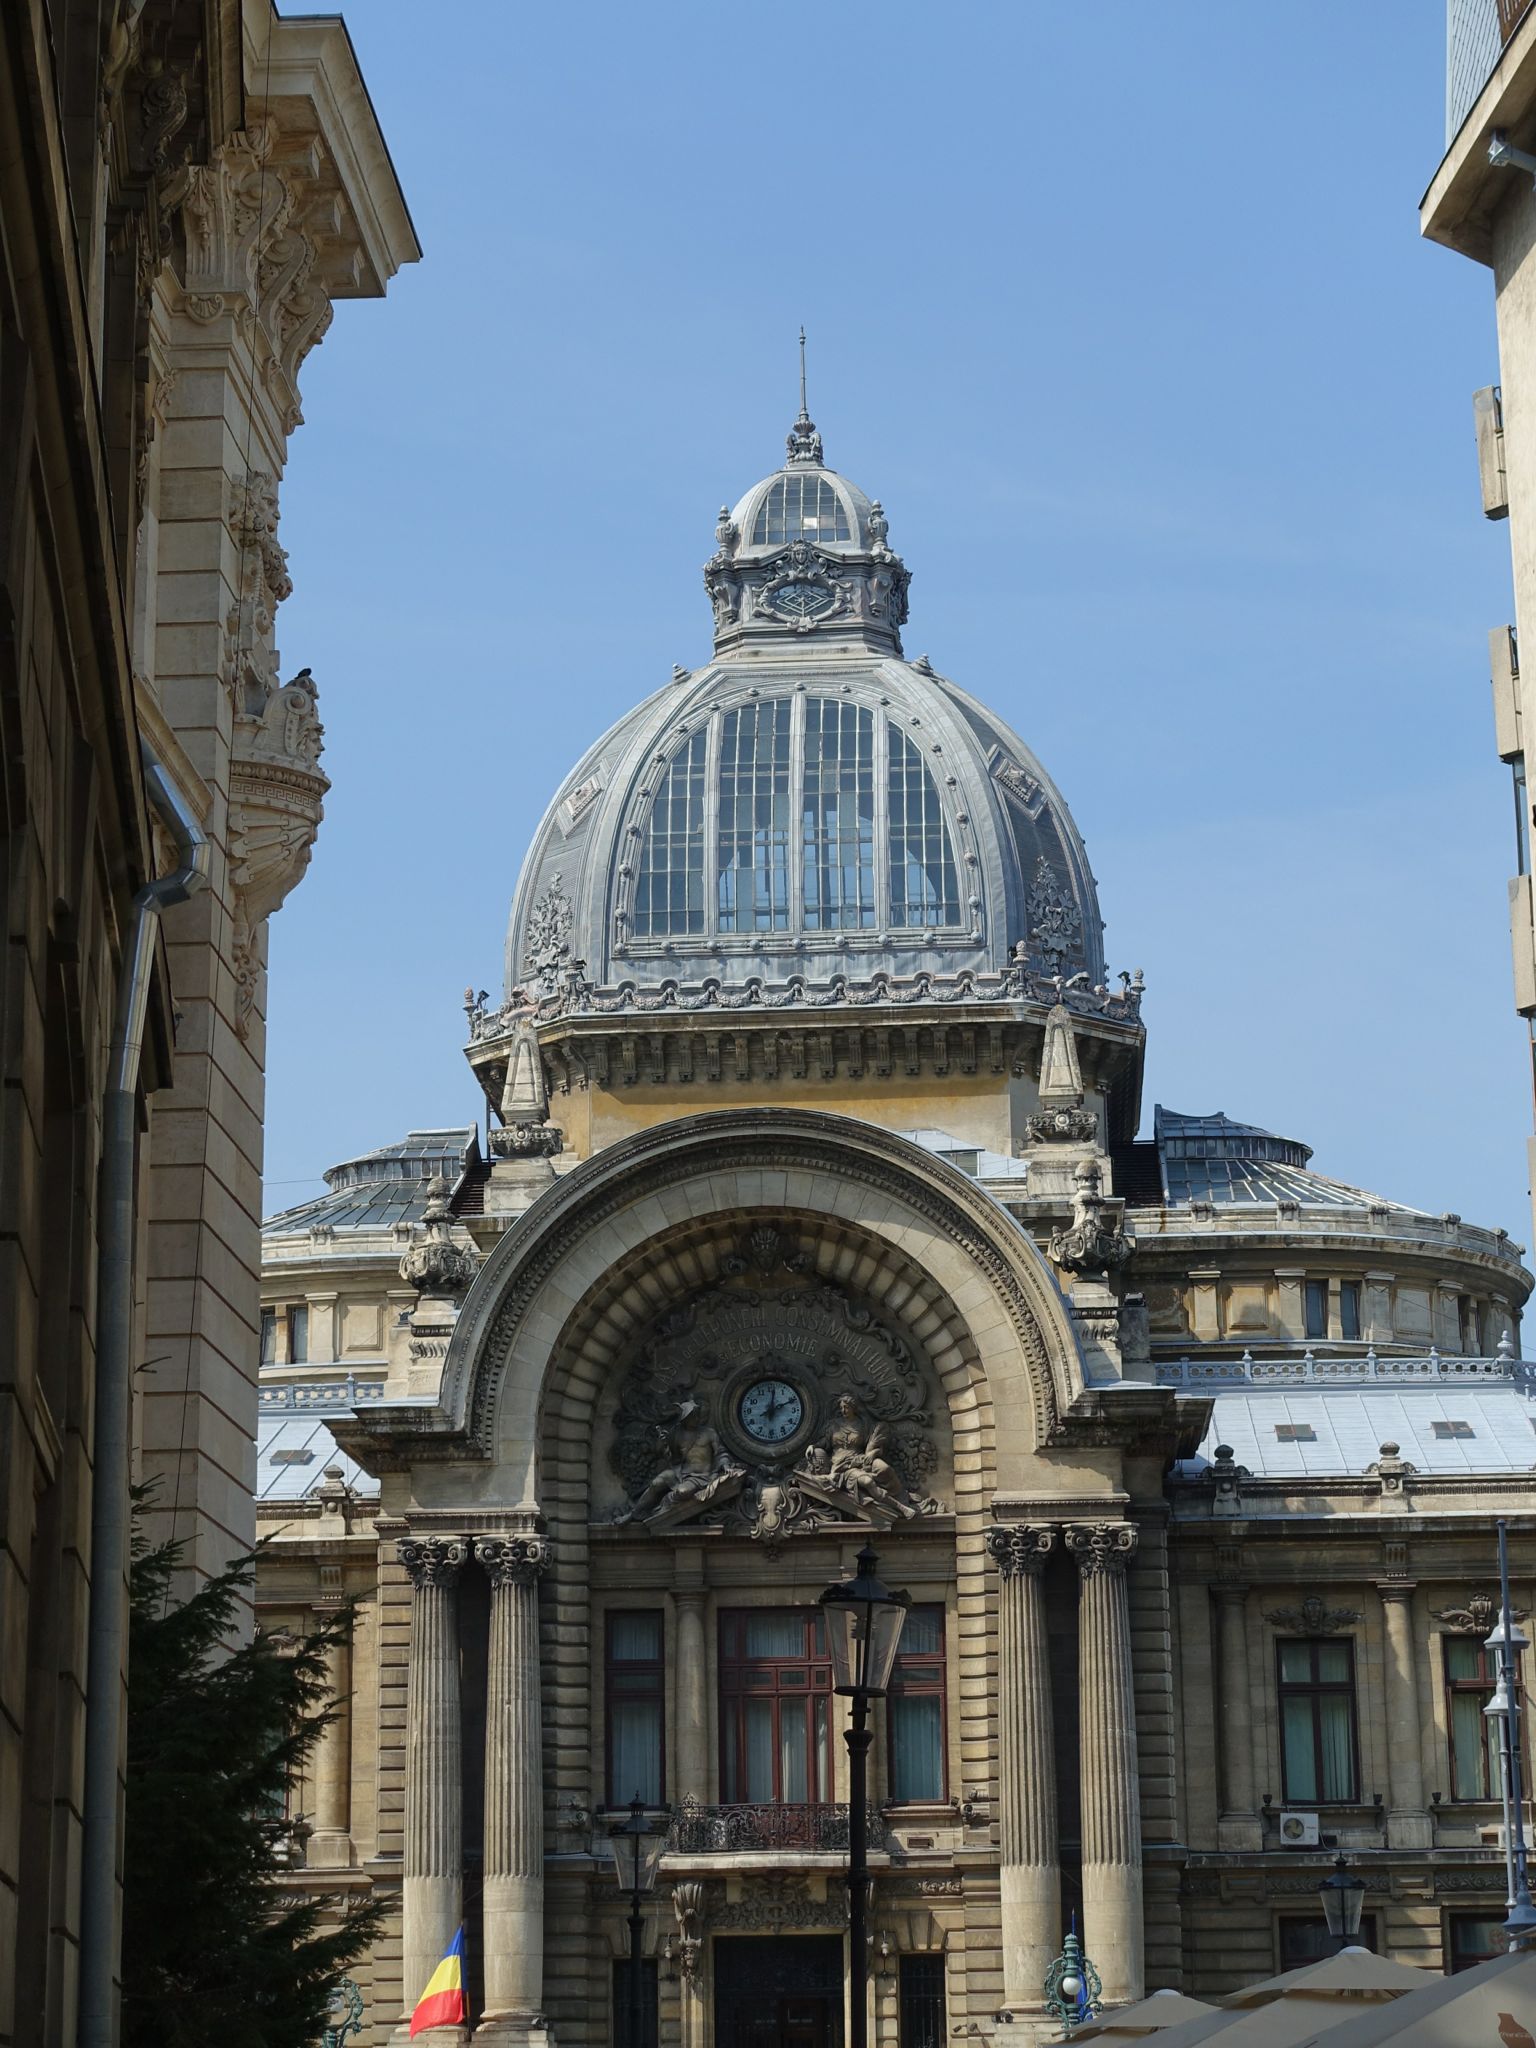 Photo 116 of 133 from the album Highlights Bucharest 2014.